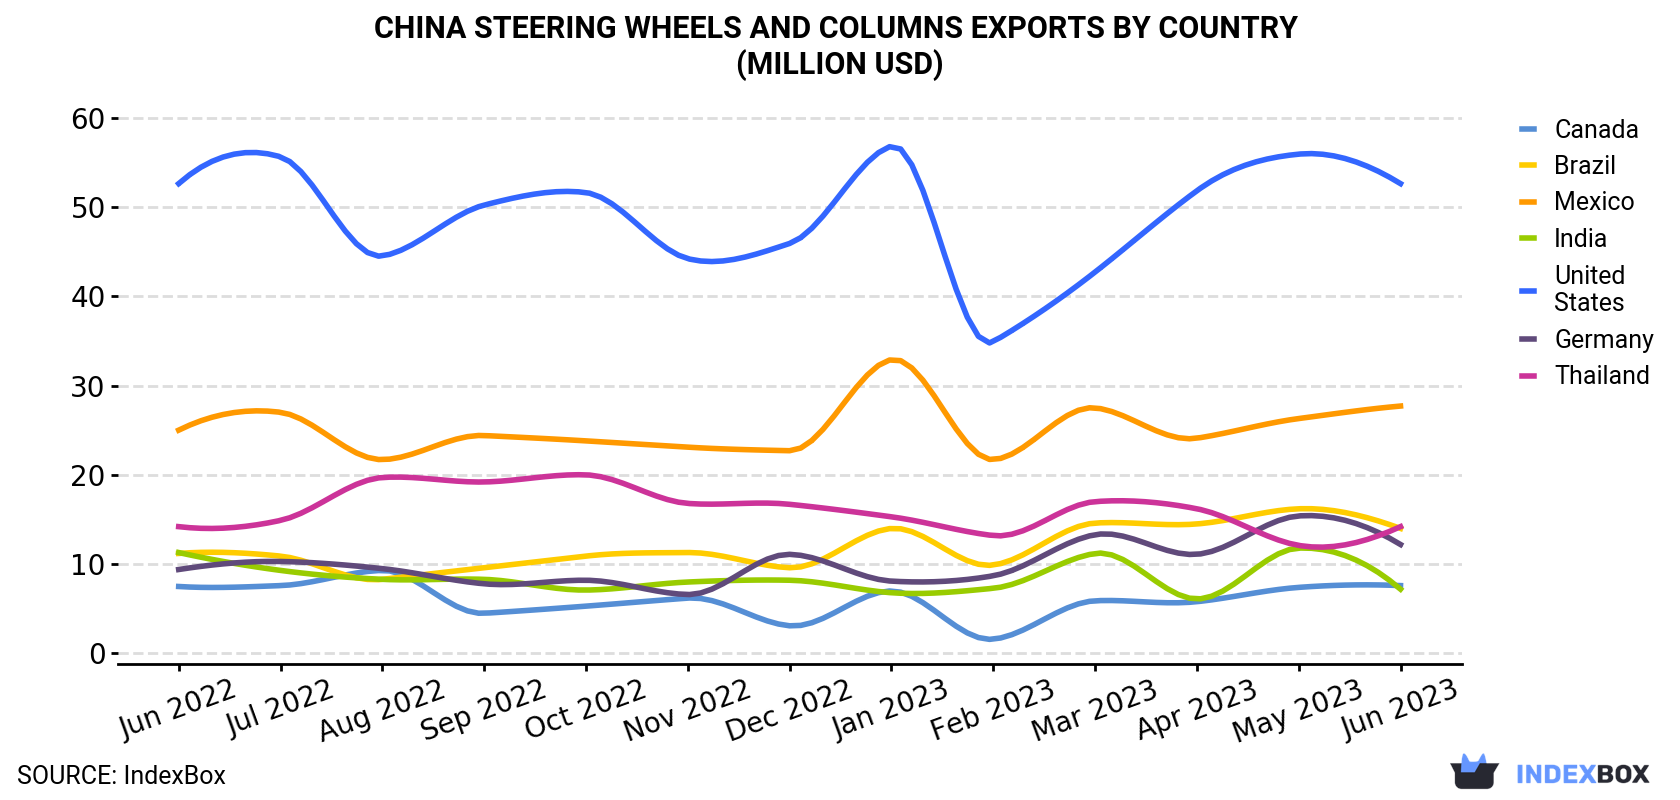 China Steering Wheels And Columns Exports By Country (Million USD)